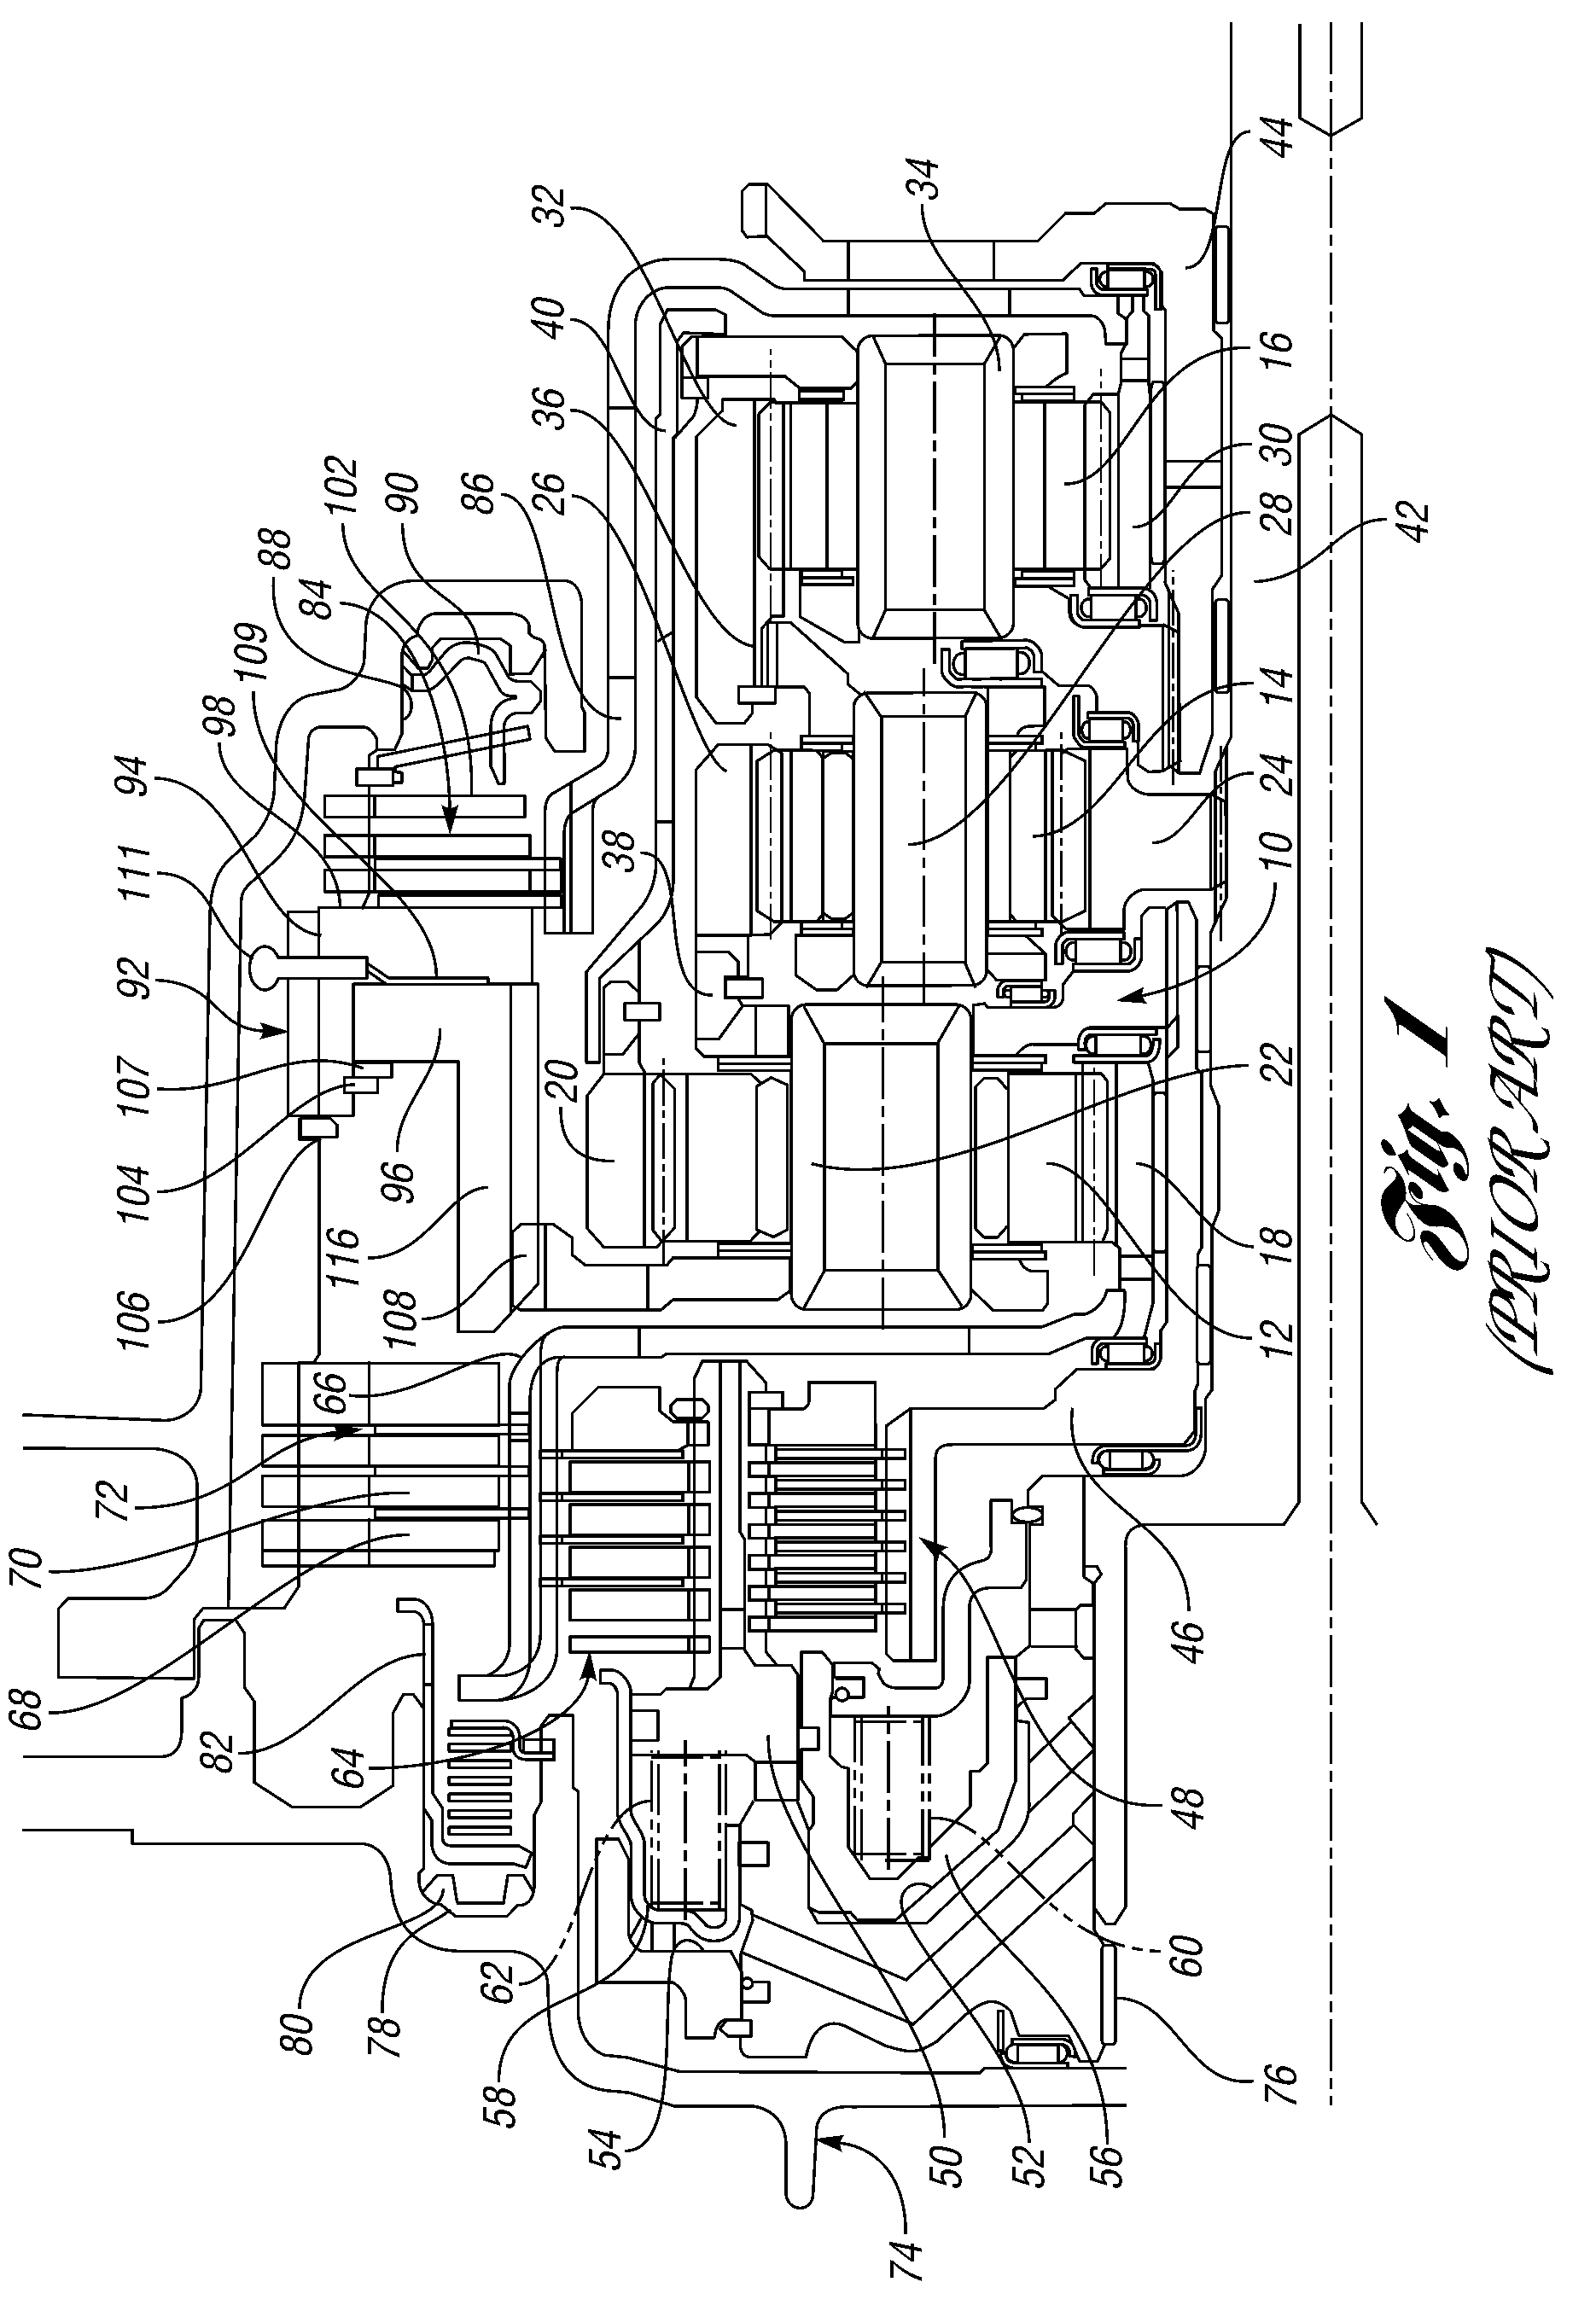 Controllable overrunning coupling assembly